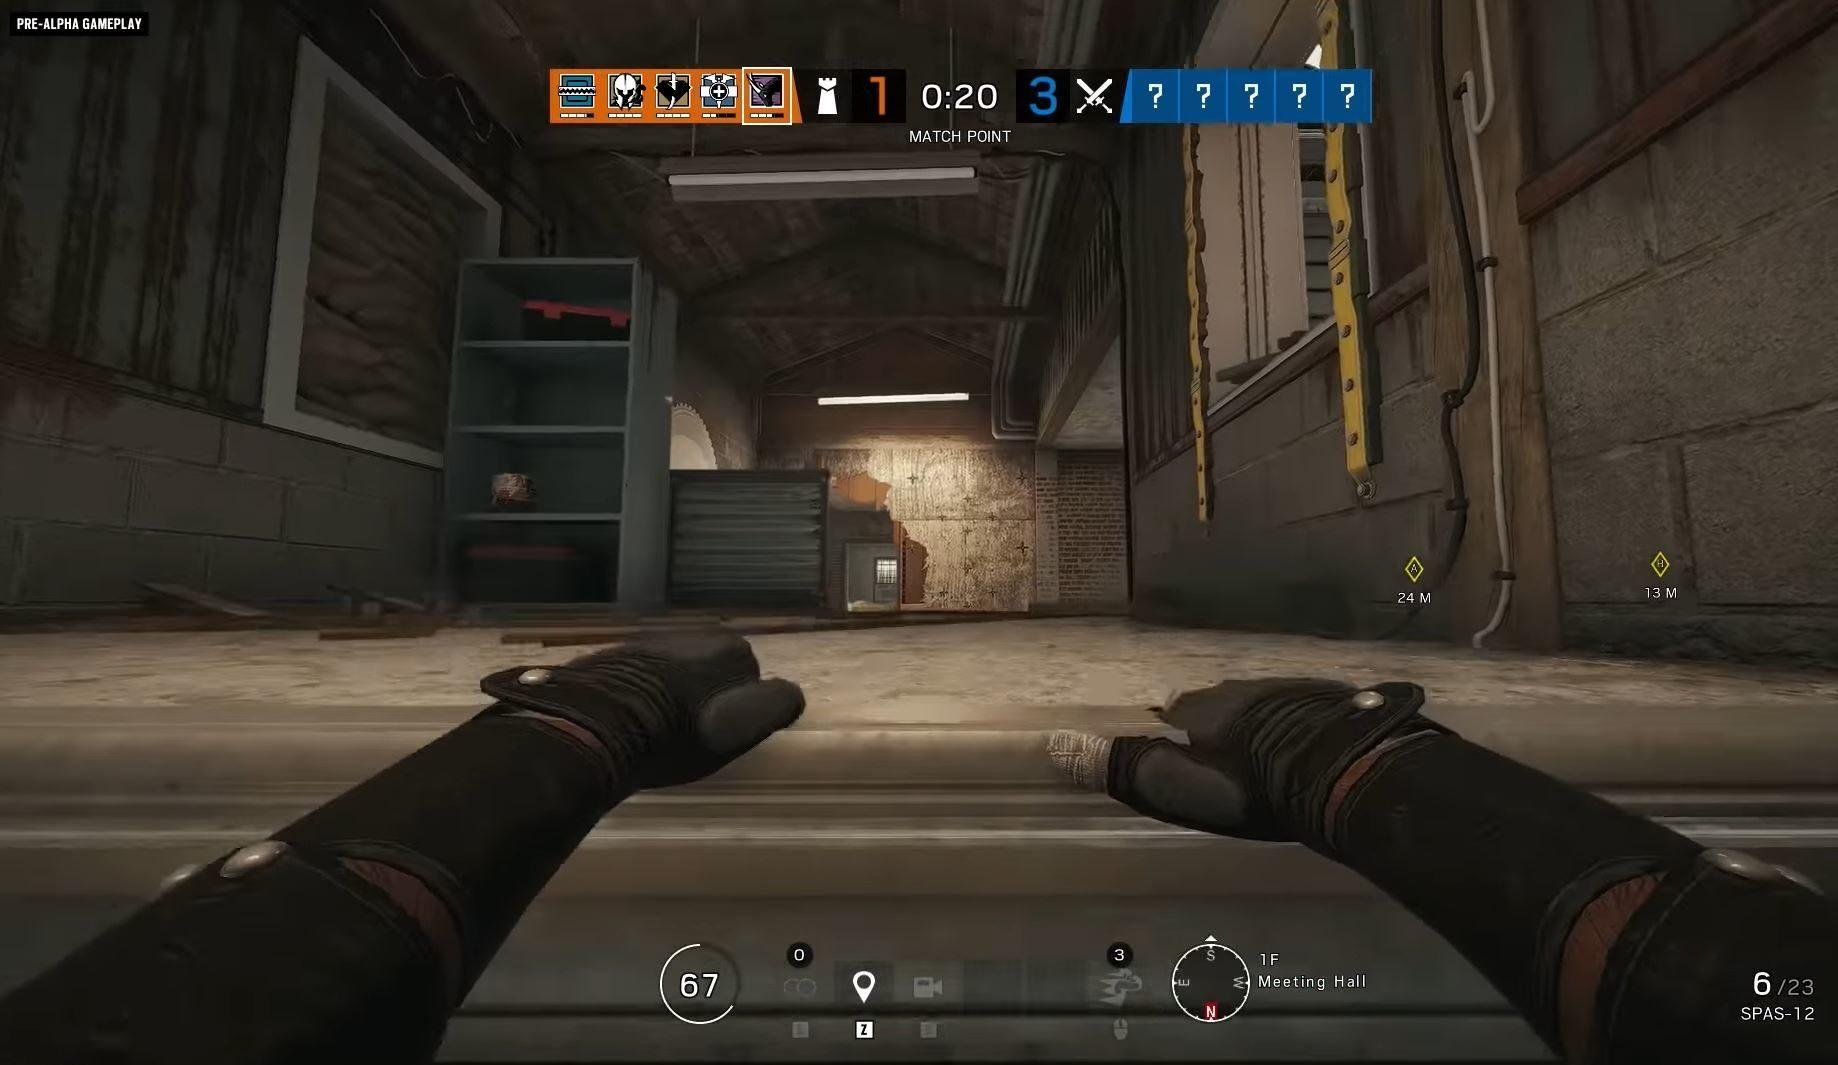 Oryx jumping up hatch in Rainbow 6